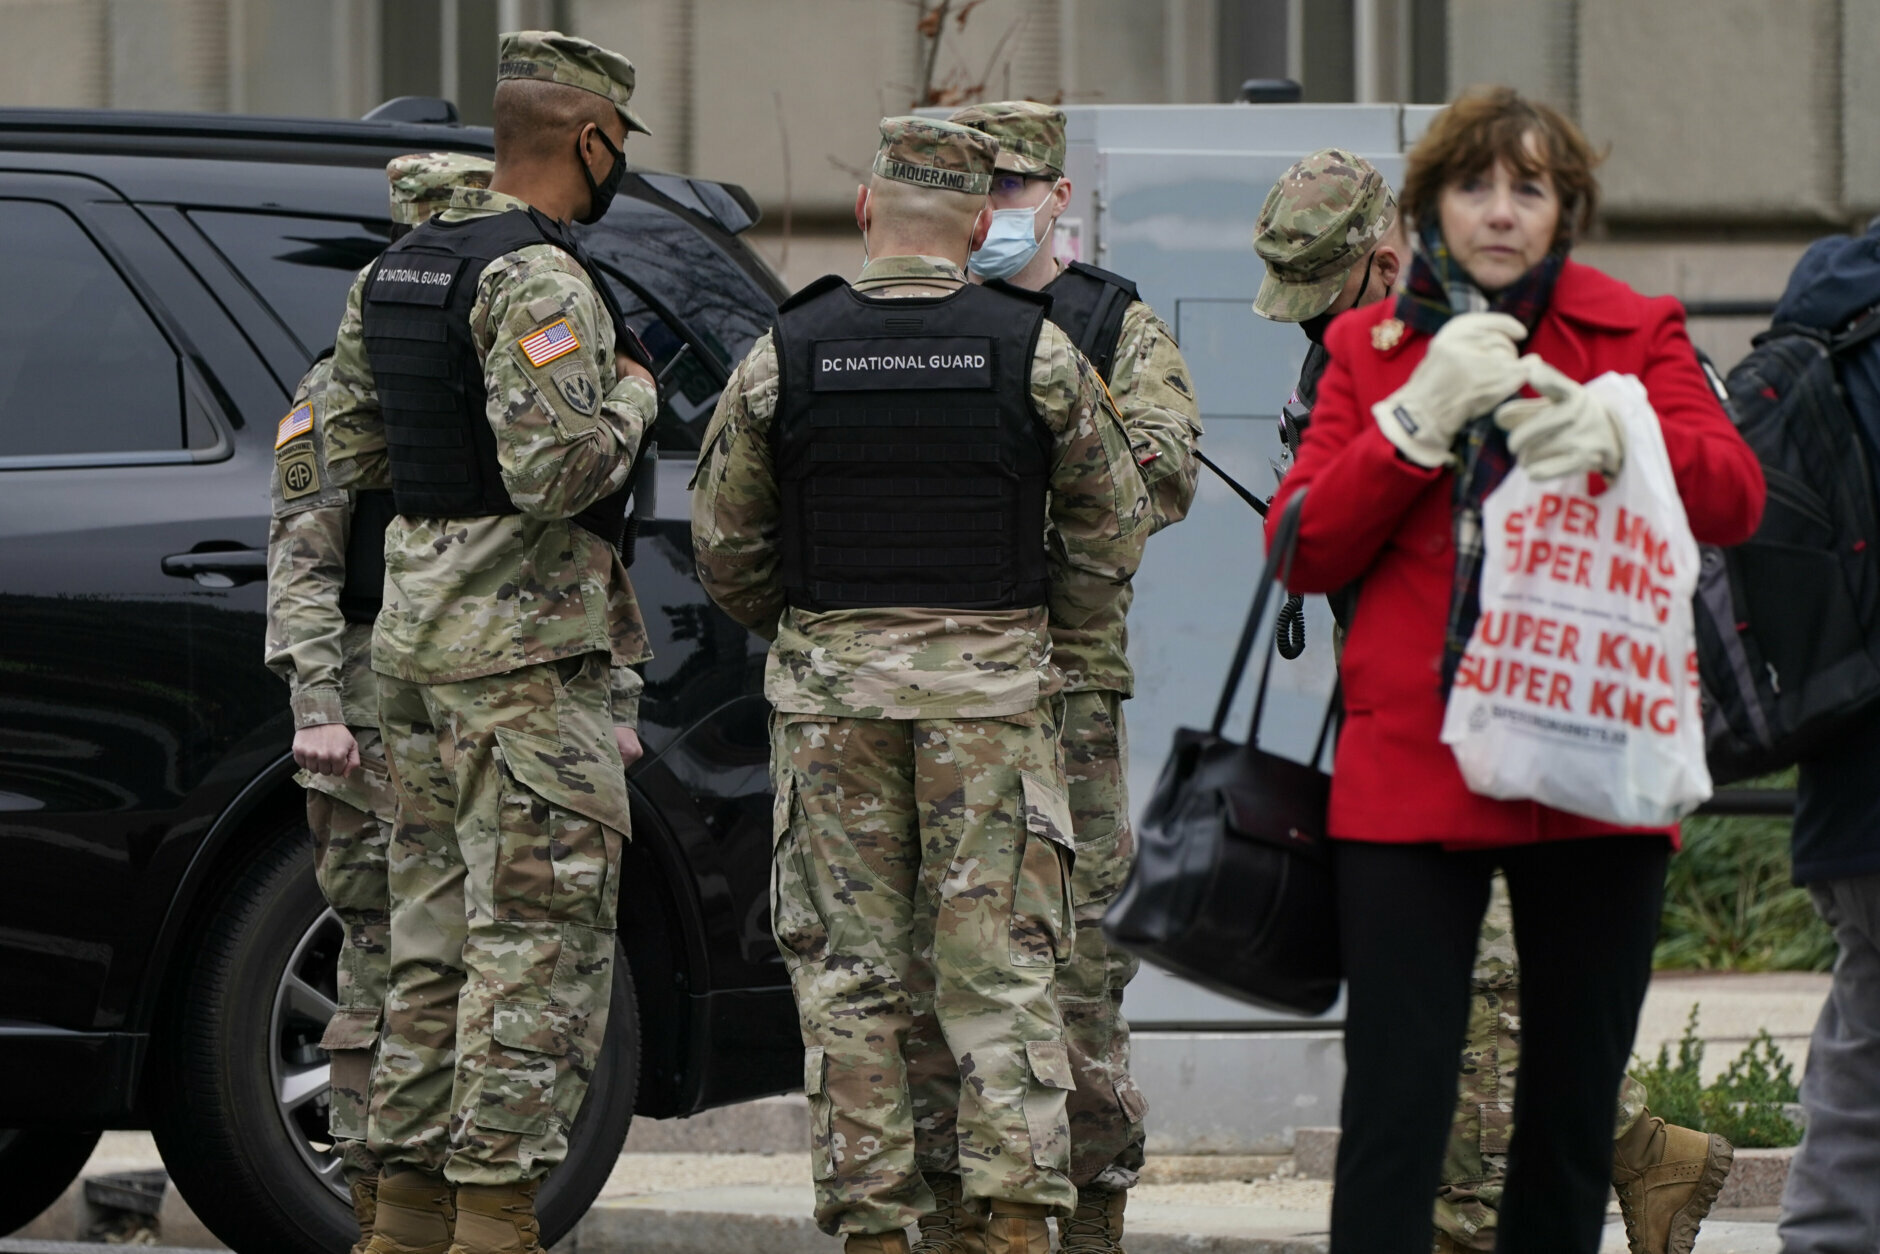 Members of the DC National Guard stand near a rally in Freedom Plaza Tuesday, Jan. 5, 2021, in Washington. Rallies in support of President Donald Trump are planned for Tuesday and Wednesday. (AP Photo/Jacquelyn Martin)